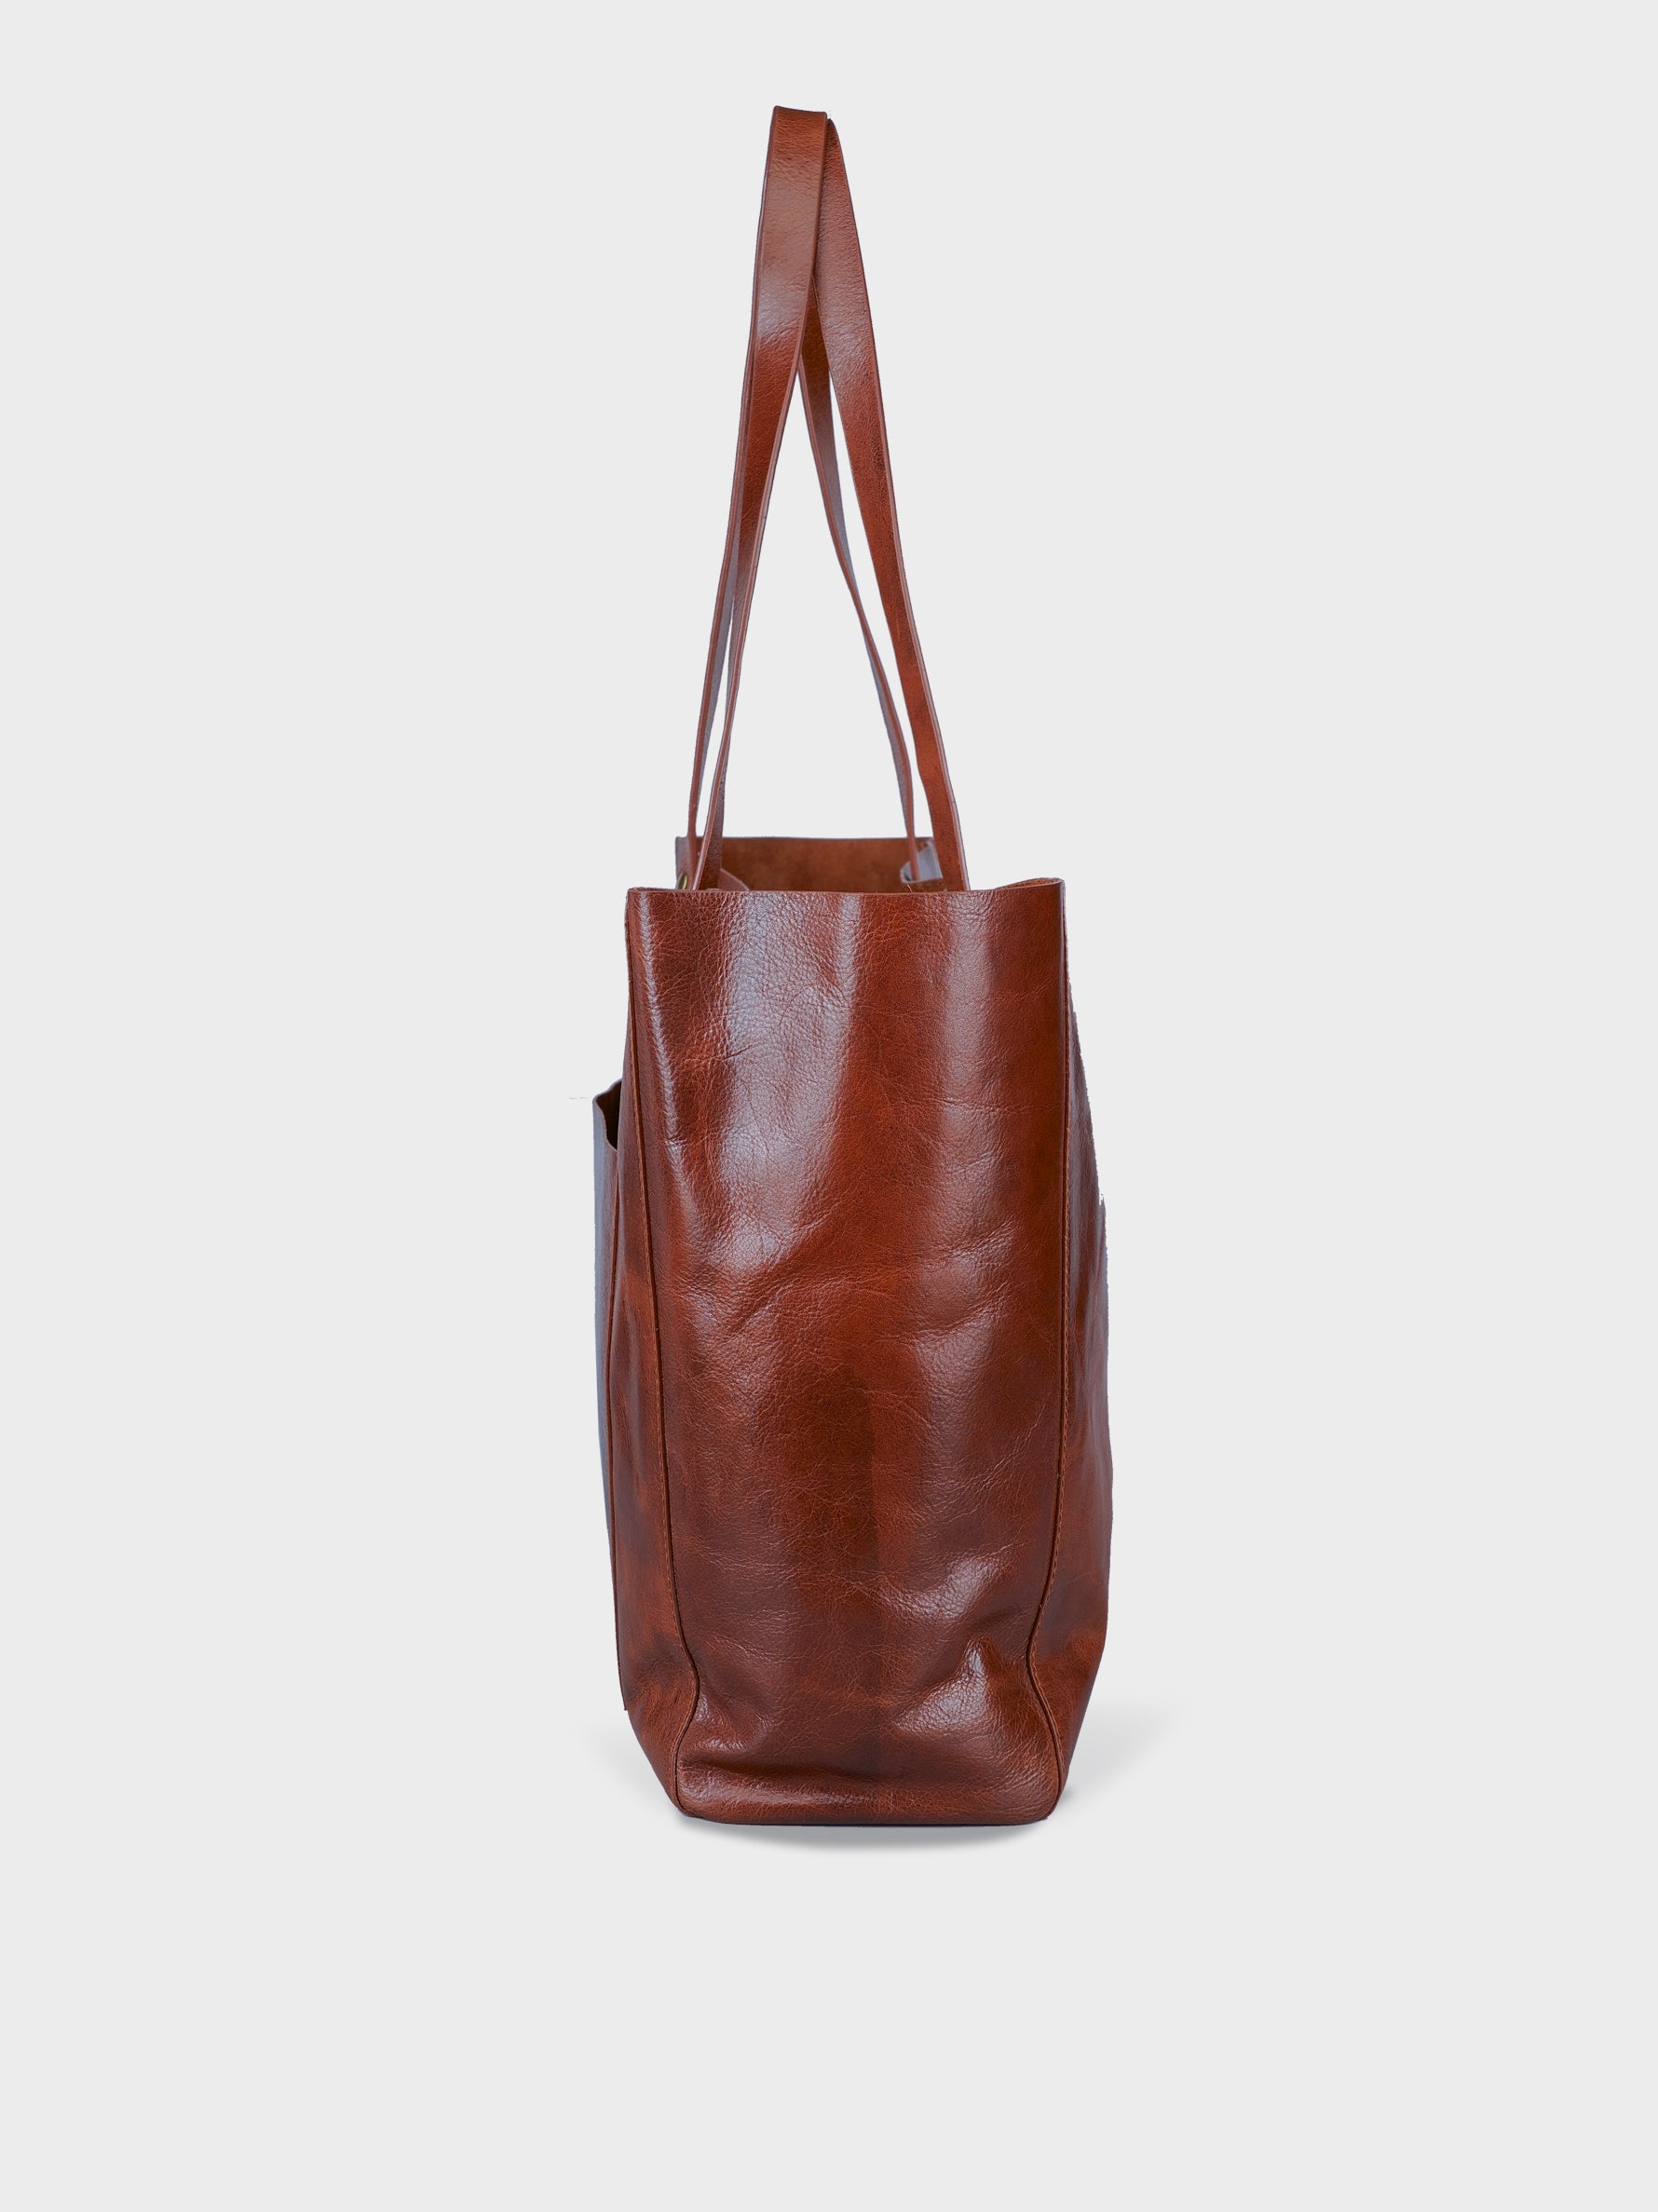 Handcrafted Genuine Vegetable Tanned Leather Old Fashioned Tote Large Vintage Brown for Women Tan & Loom